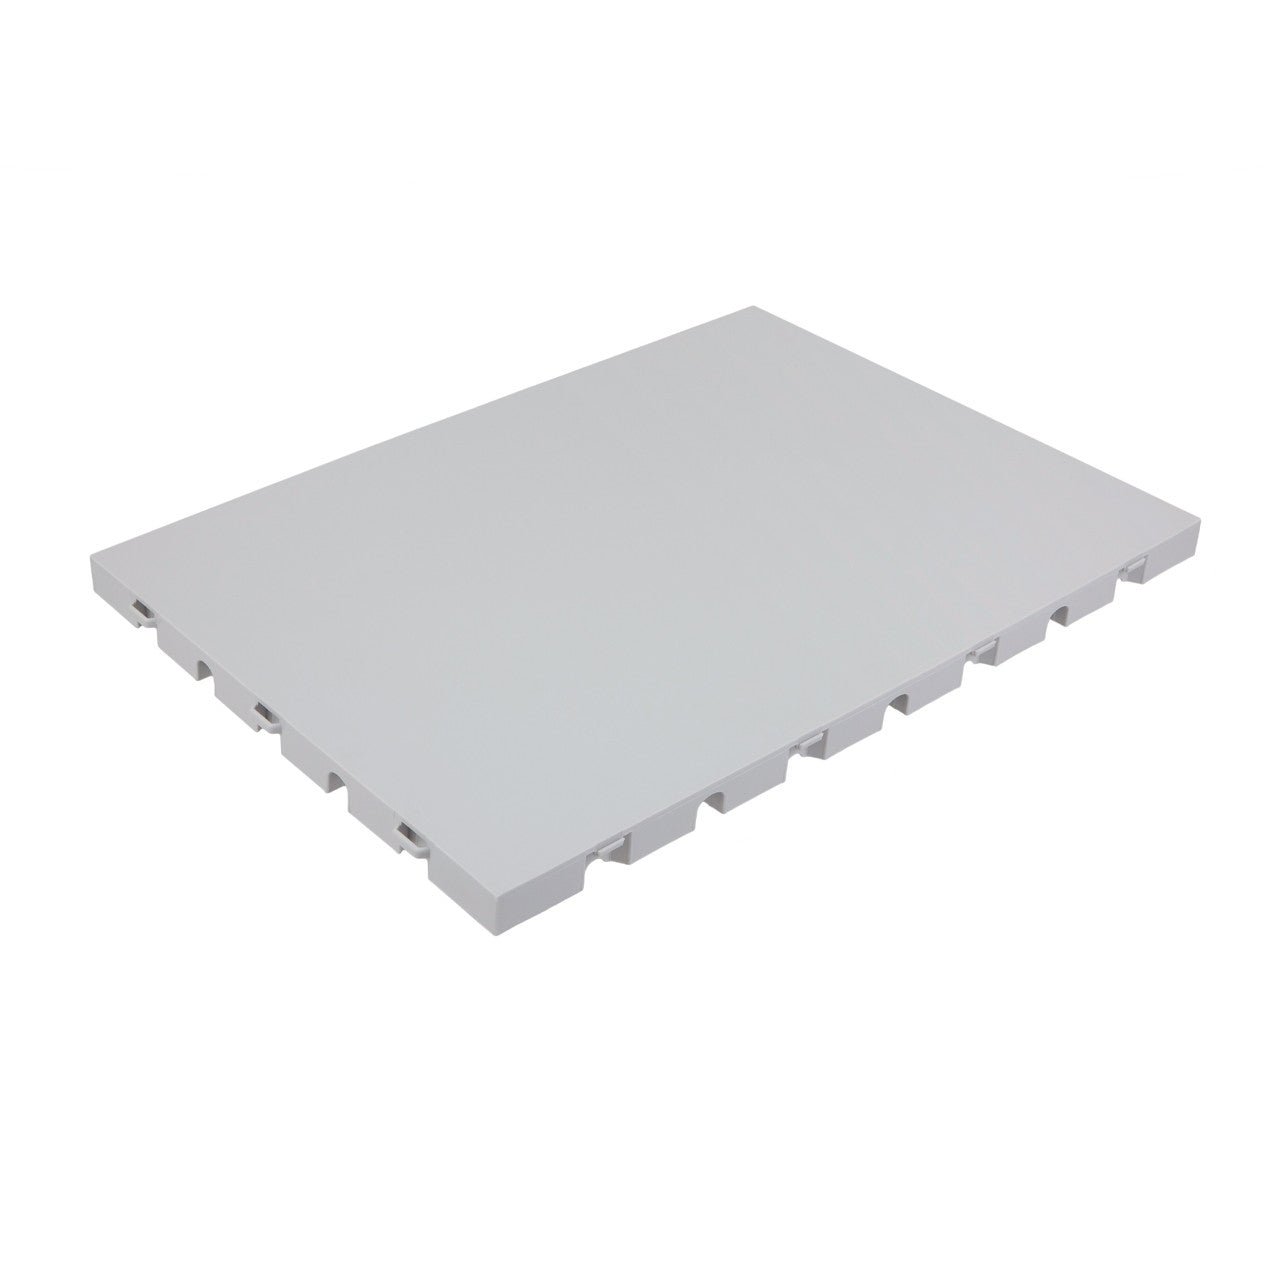 Flooring Tile 18" x 24" with Solid or Drainage Light Gray Surface - SchoolOutlet